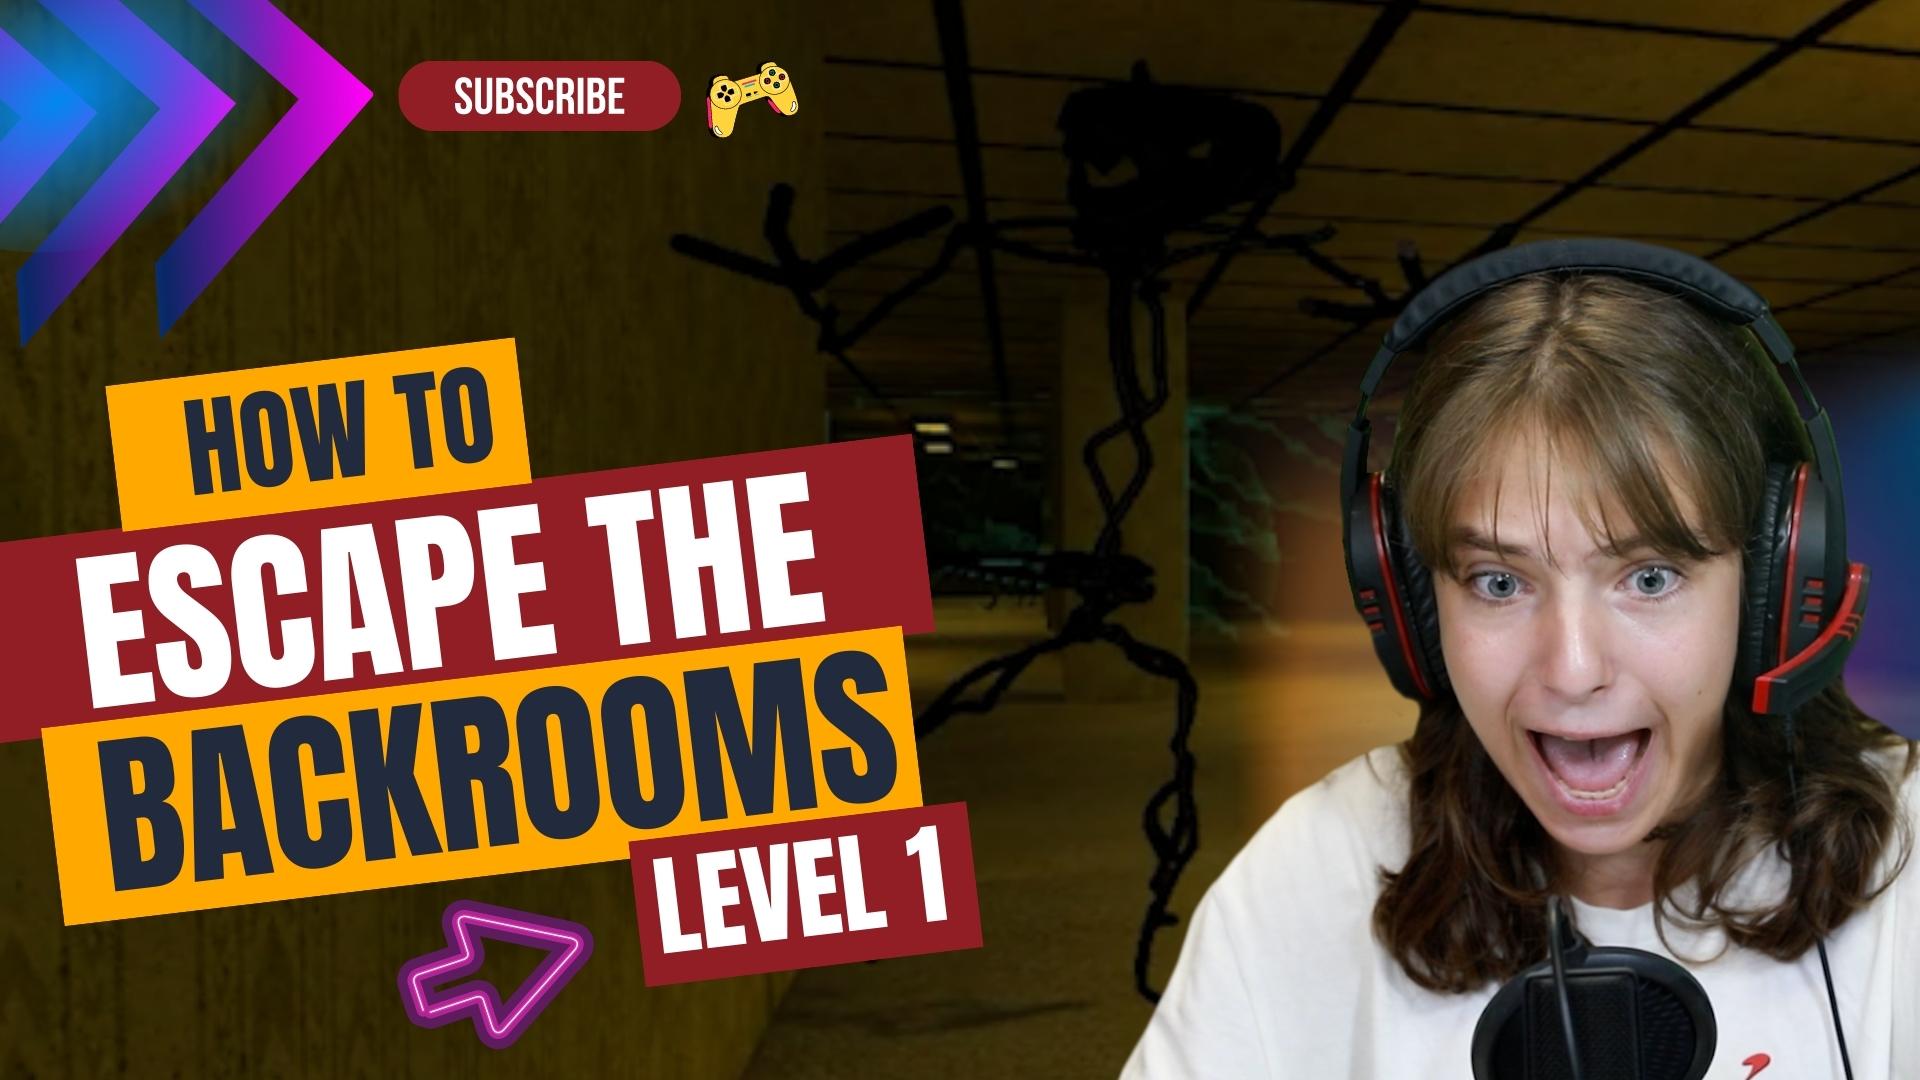 FULL walkthrough - Level 1 [] ESCAPE THE BACKROOMS [] NO commentary 